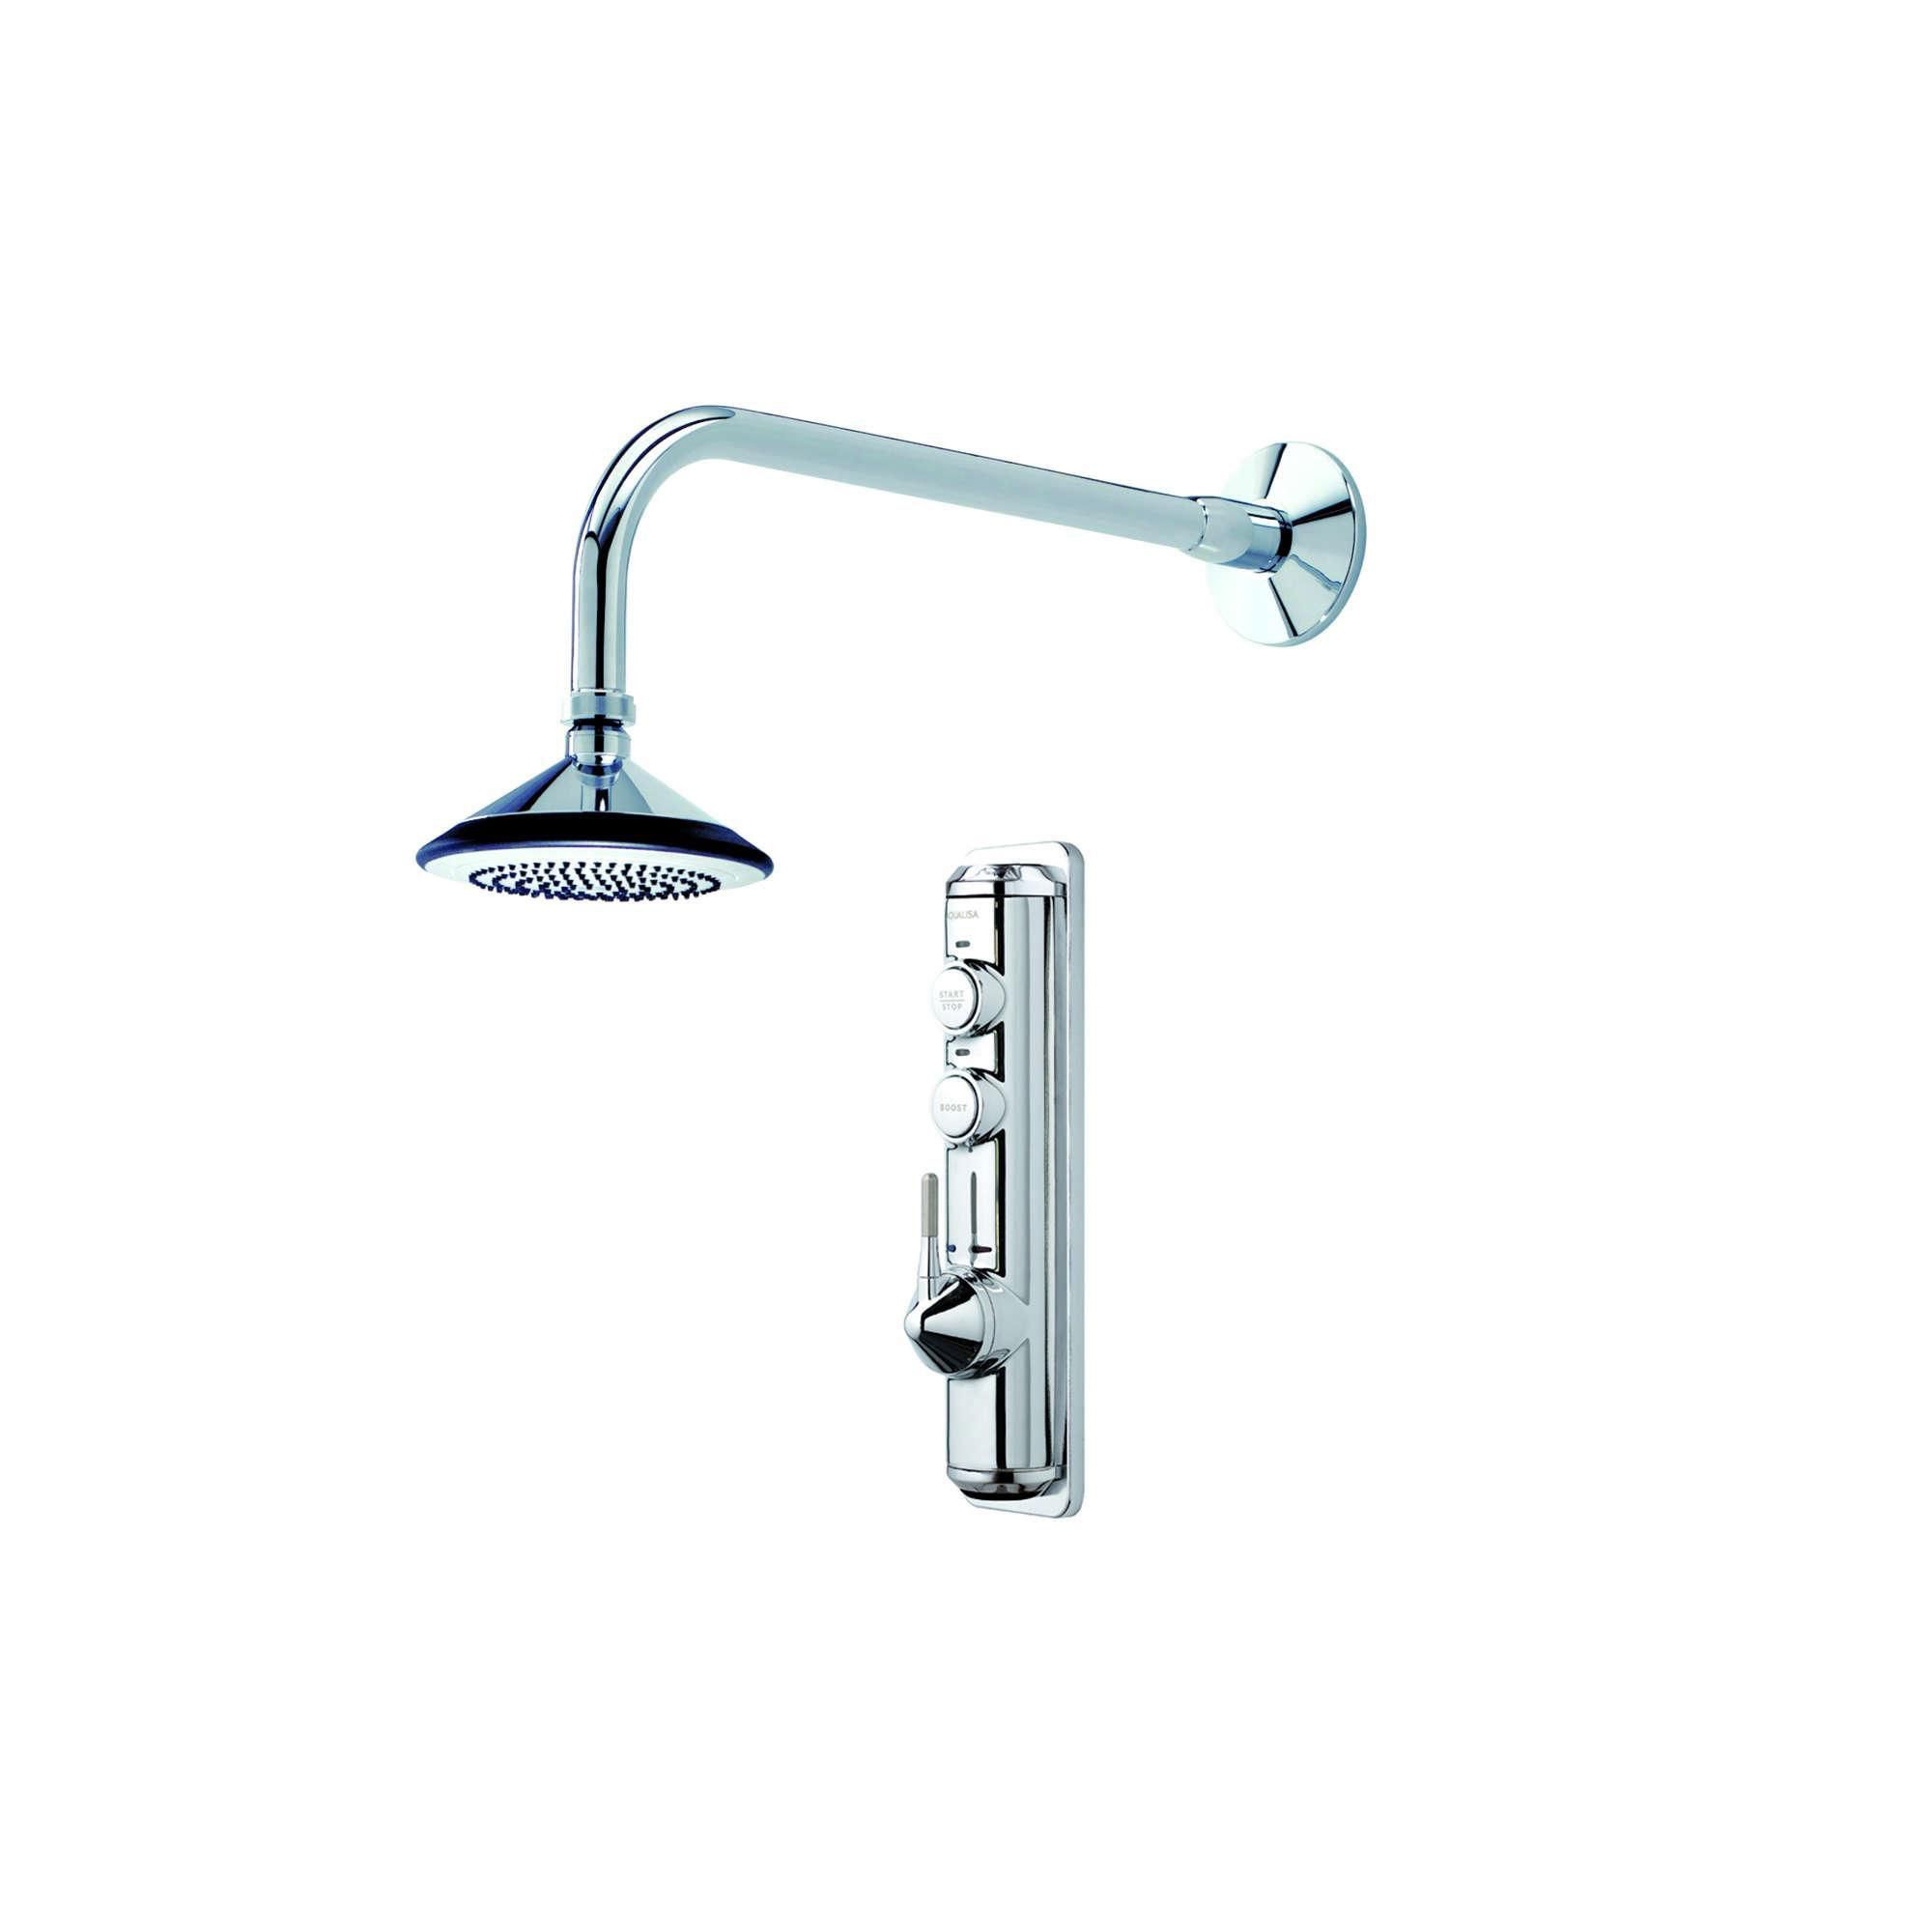 Aqualisa Axis Digital Concealed Shower with Fixed Head (Wall Mounted) at Tesco Direct